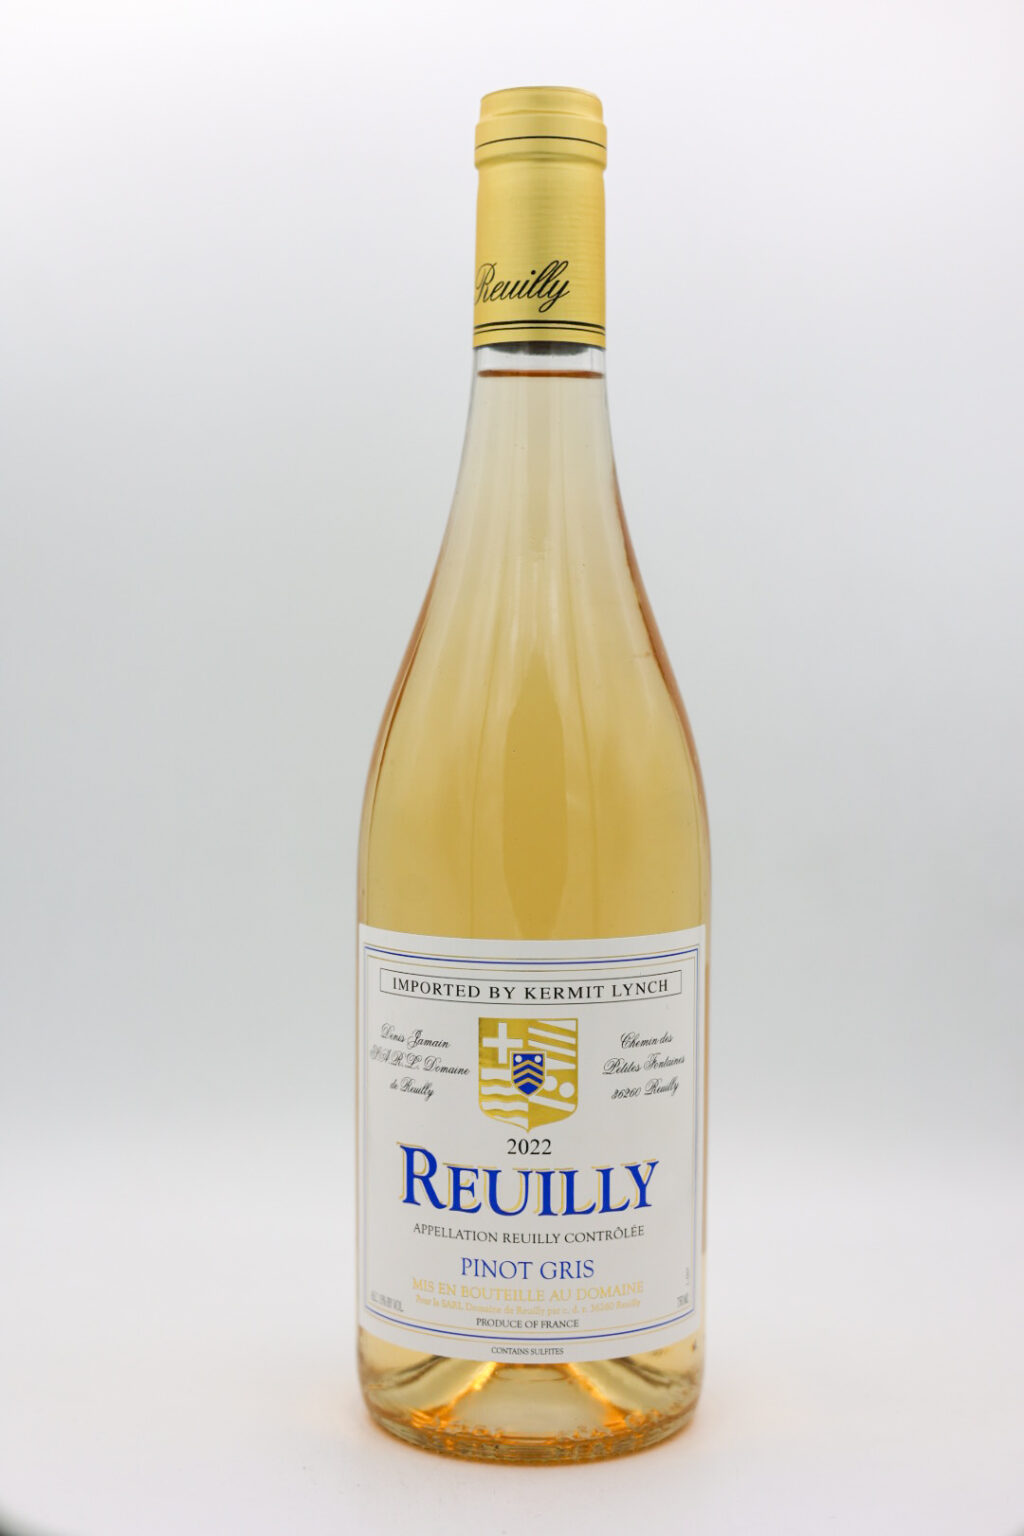 Domaine Reuilly Pinot Gris 2022